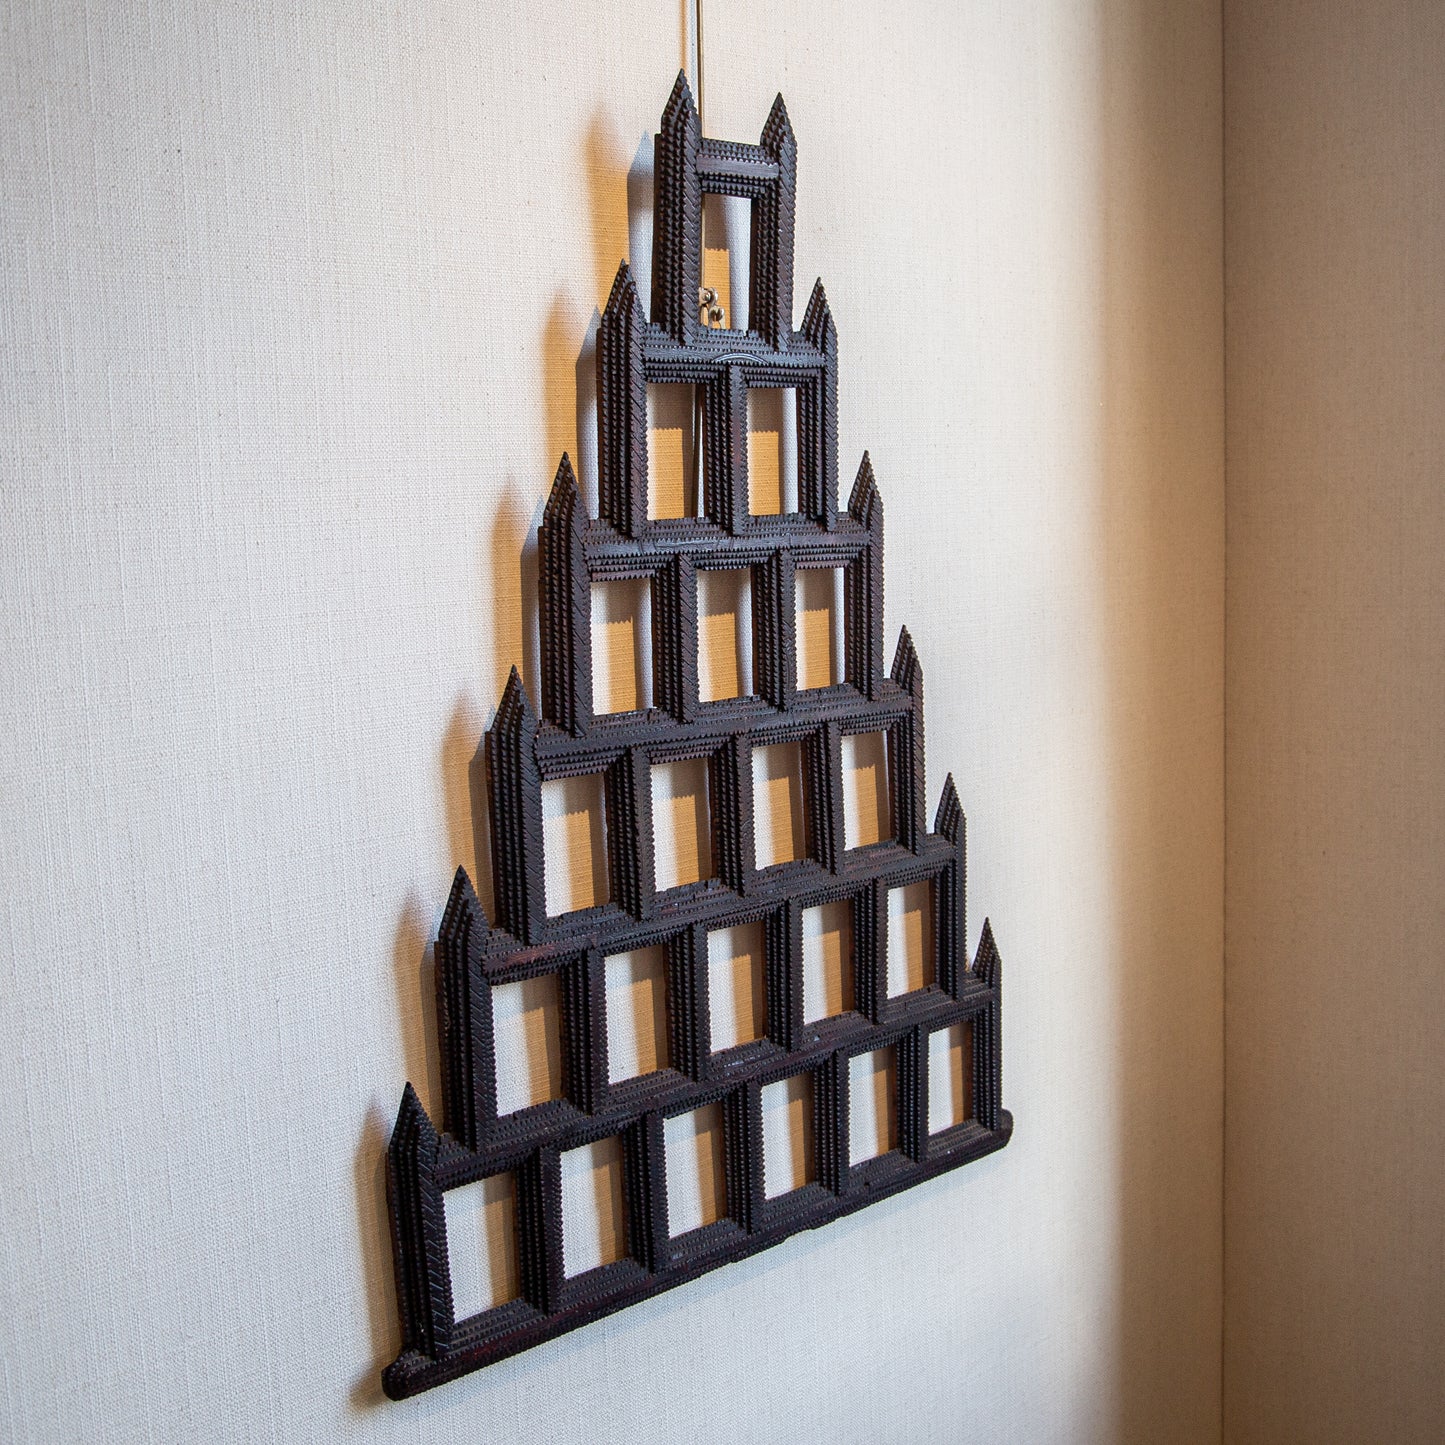 A CHIP CARVED PYRAMID SHAPED FRAME